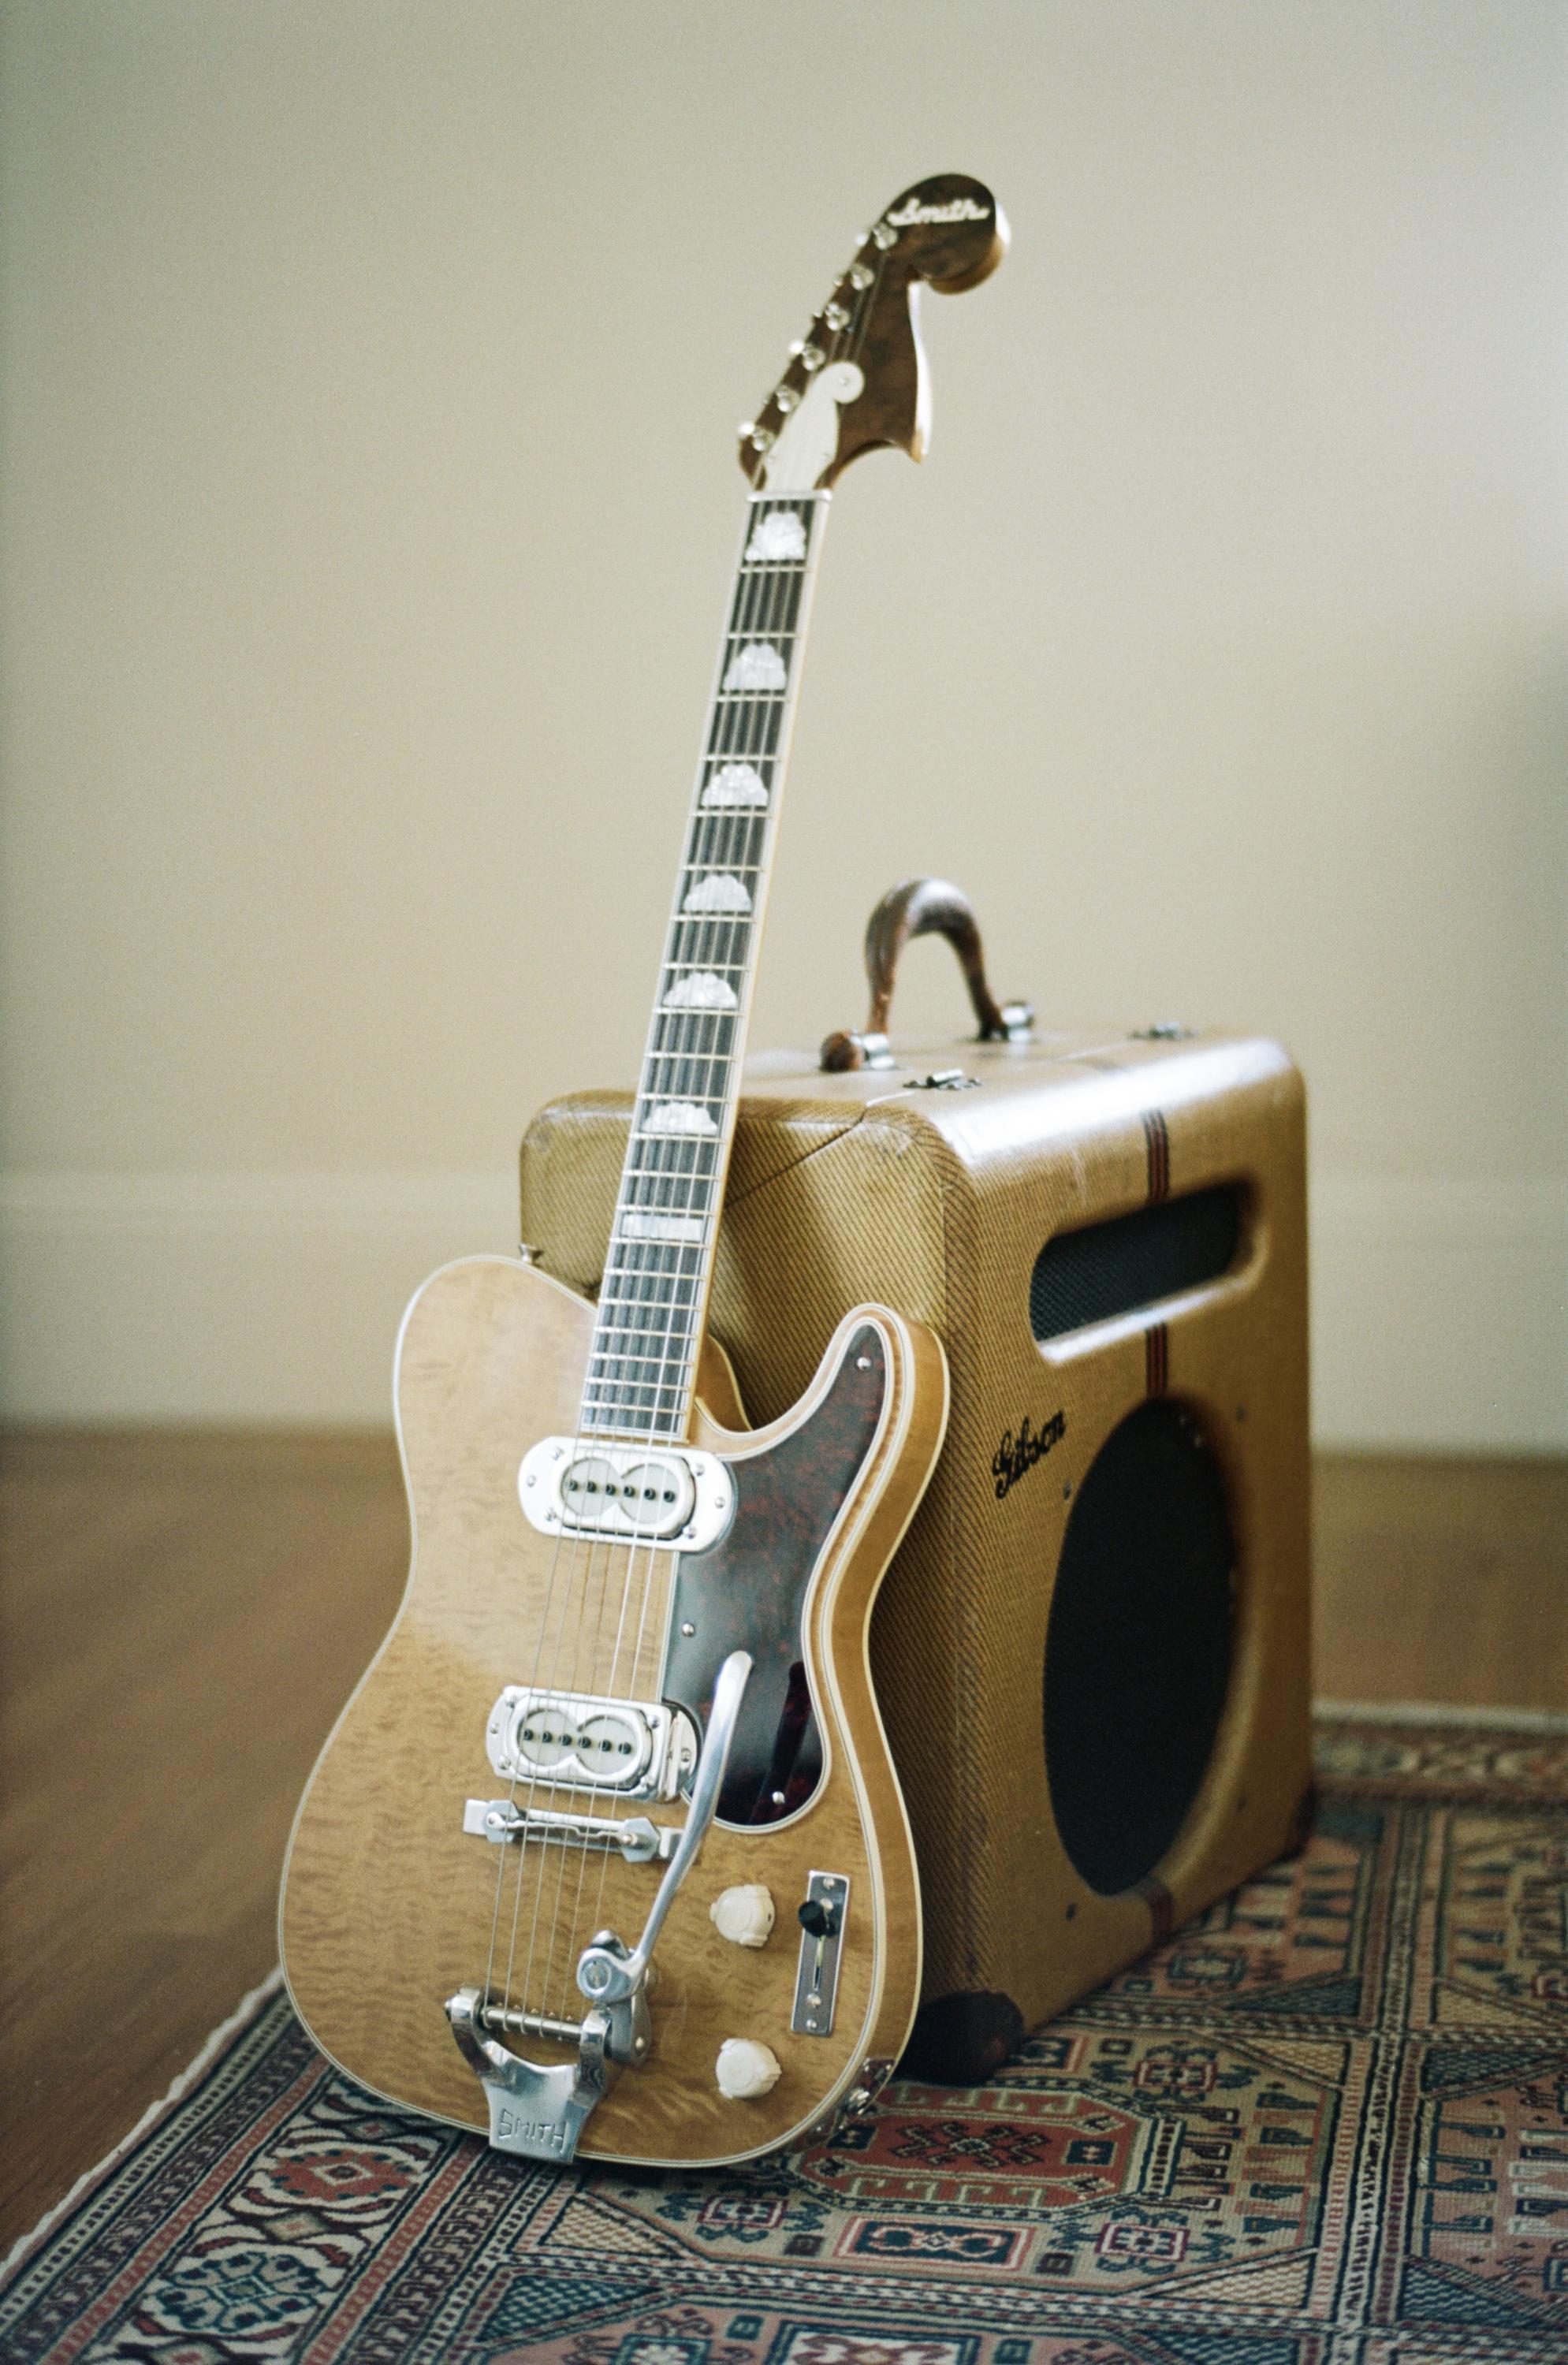 Telecaster Love Thread, No Archtops Allowed-img_7118-jpg